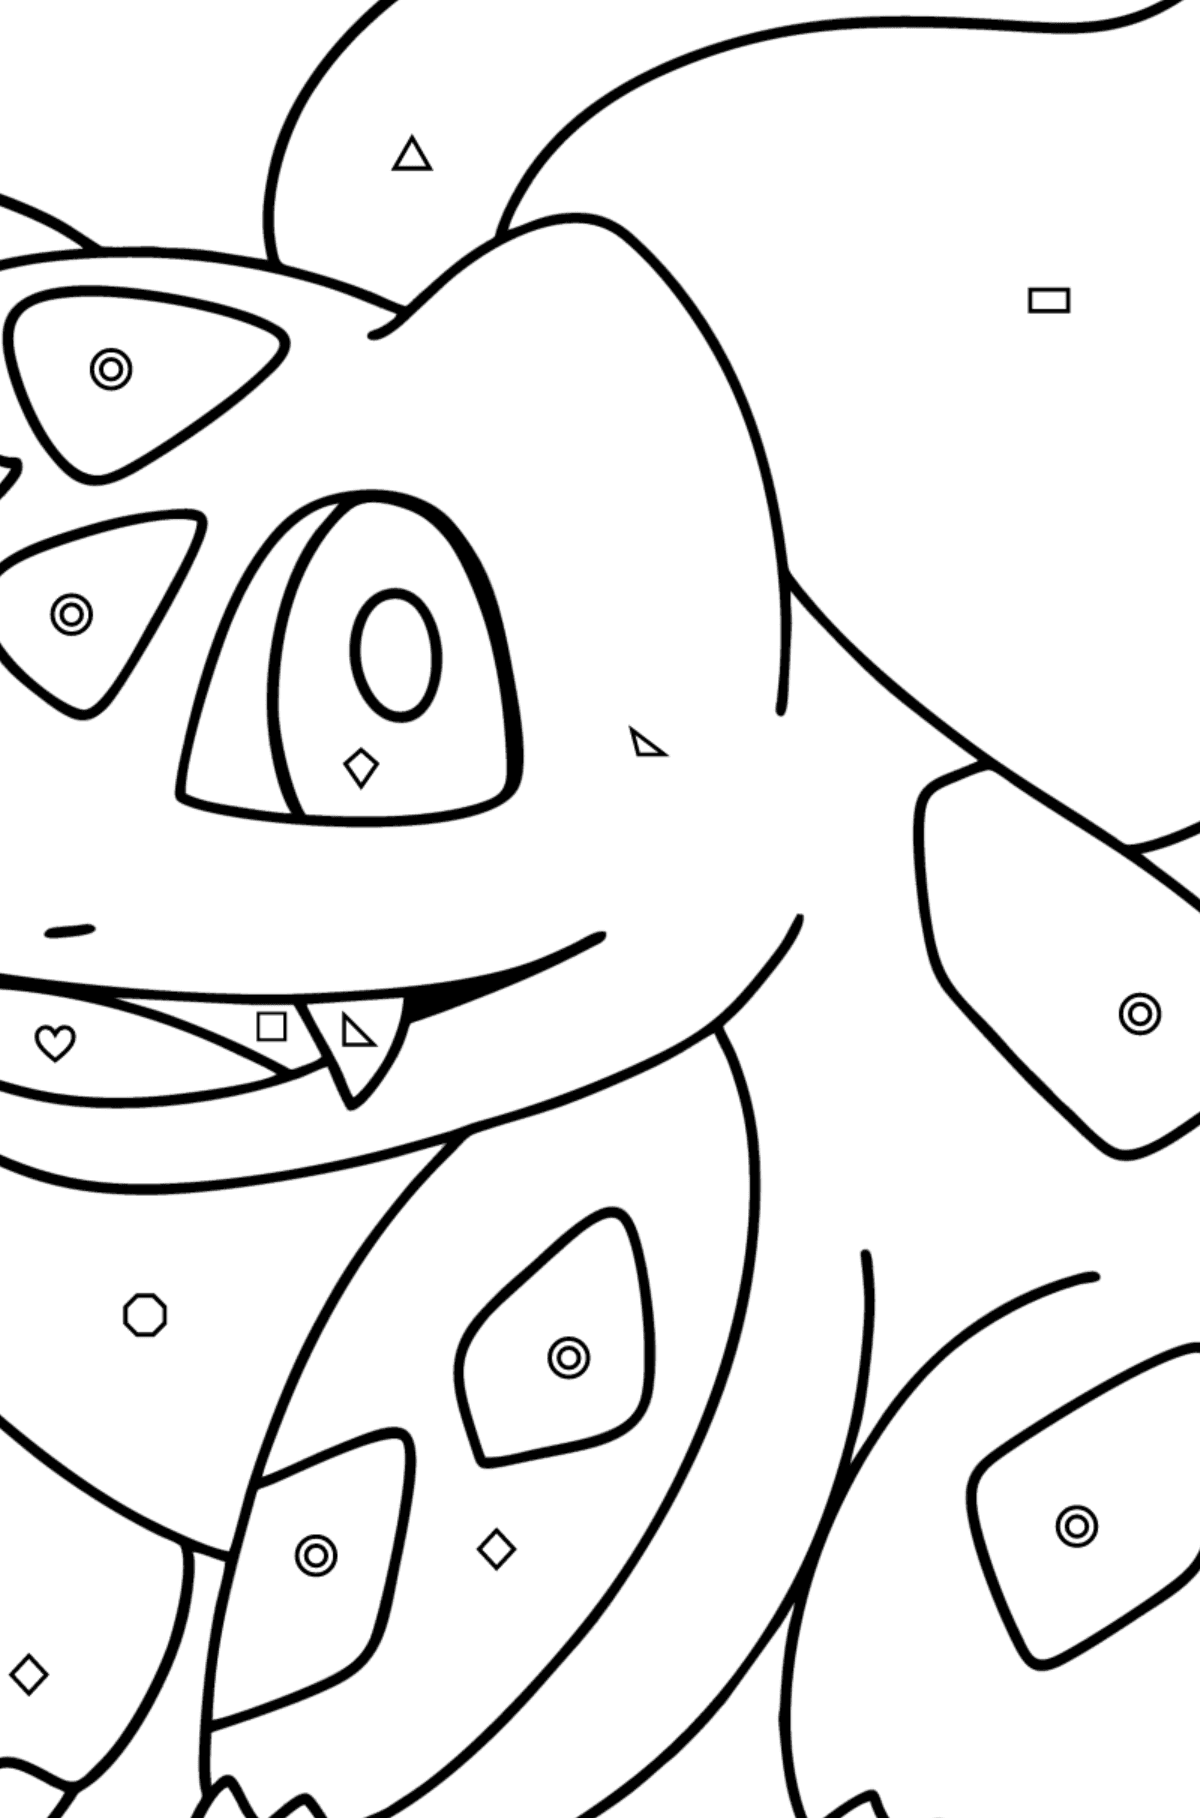 Pokémon Go Bulbasaur coloring page - Coloring by Geometric Shapes for Kids